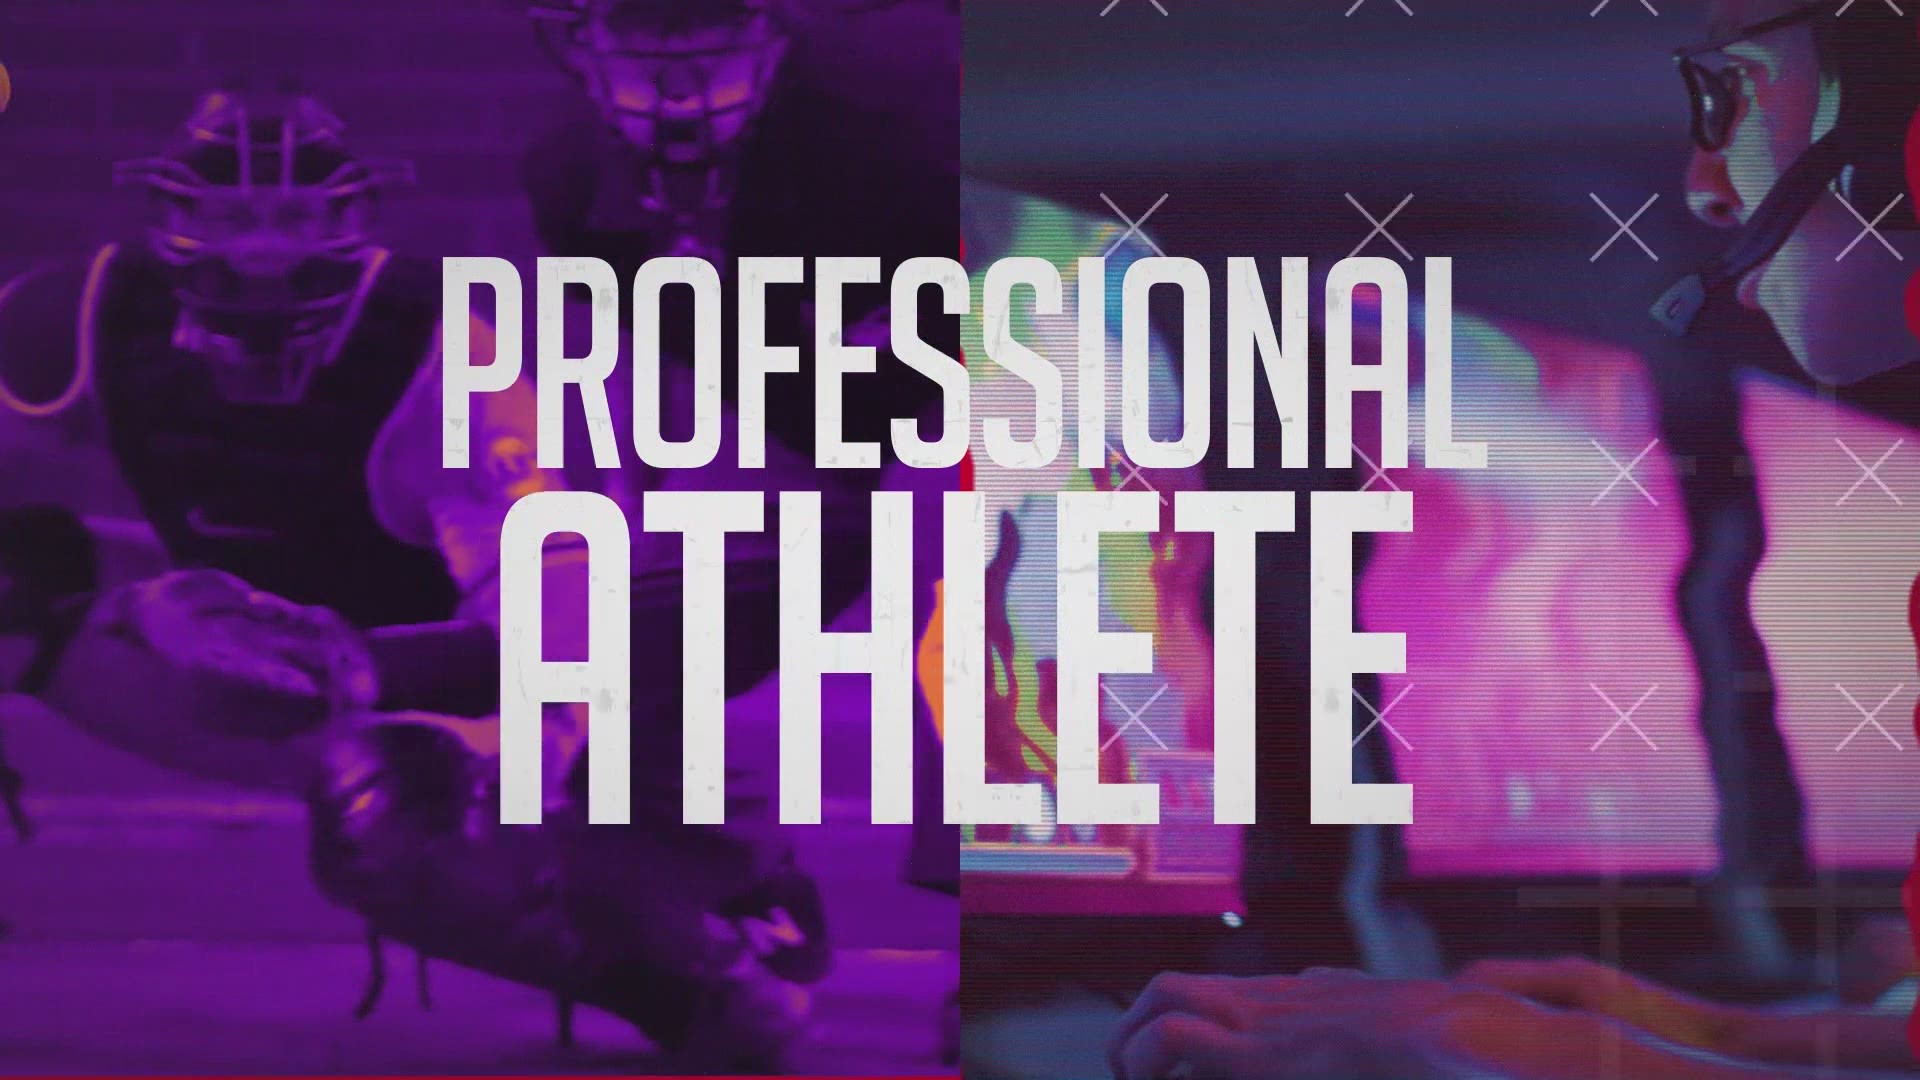 These are the nominees for the Outstanding Professional Athlete award presented by Truist.